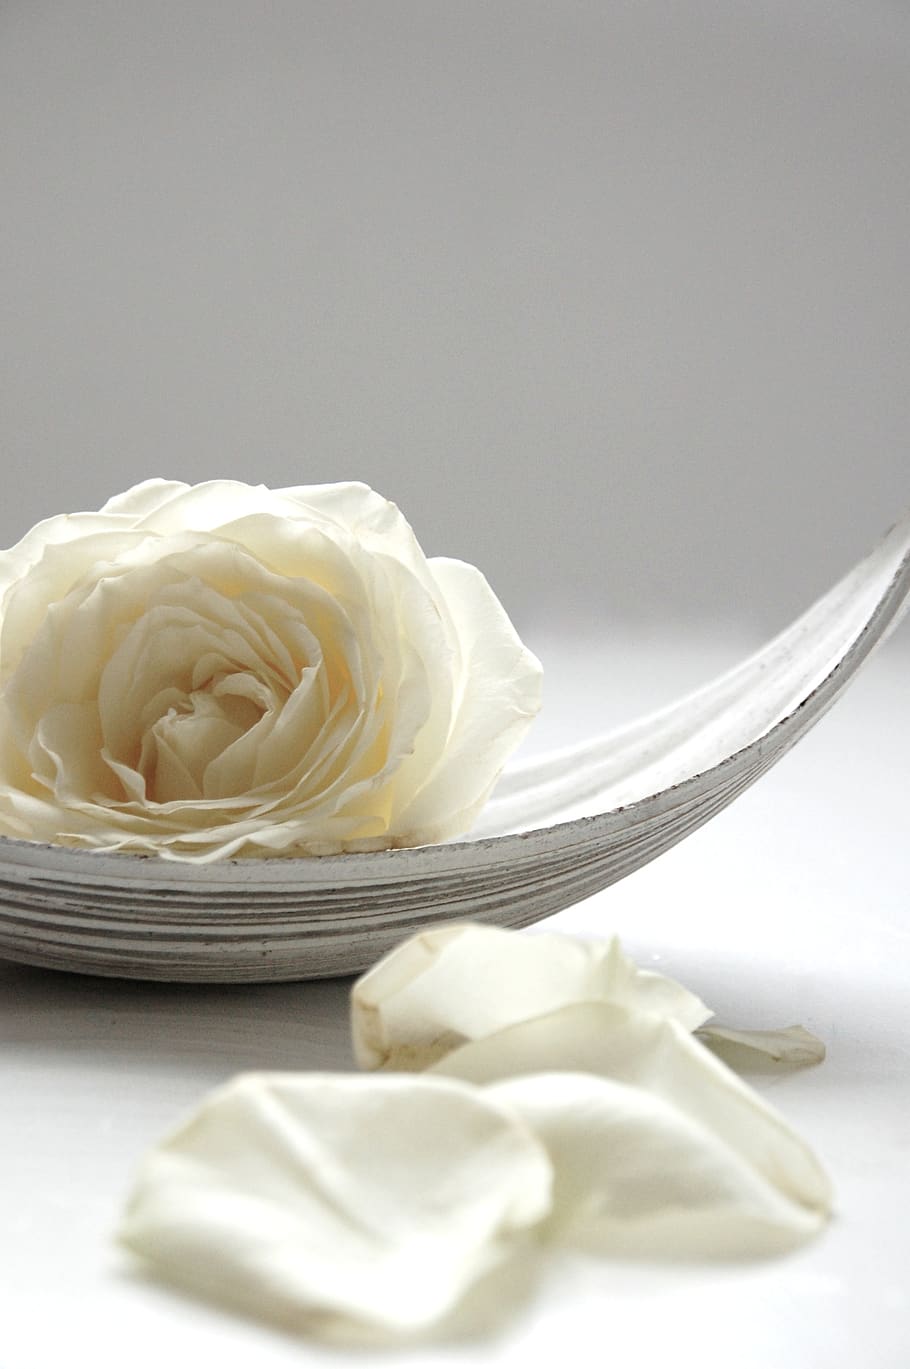 rose, white, still life, blossom, bloom, white roses, flower, way of the roses, wedding, bouquet